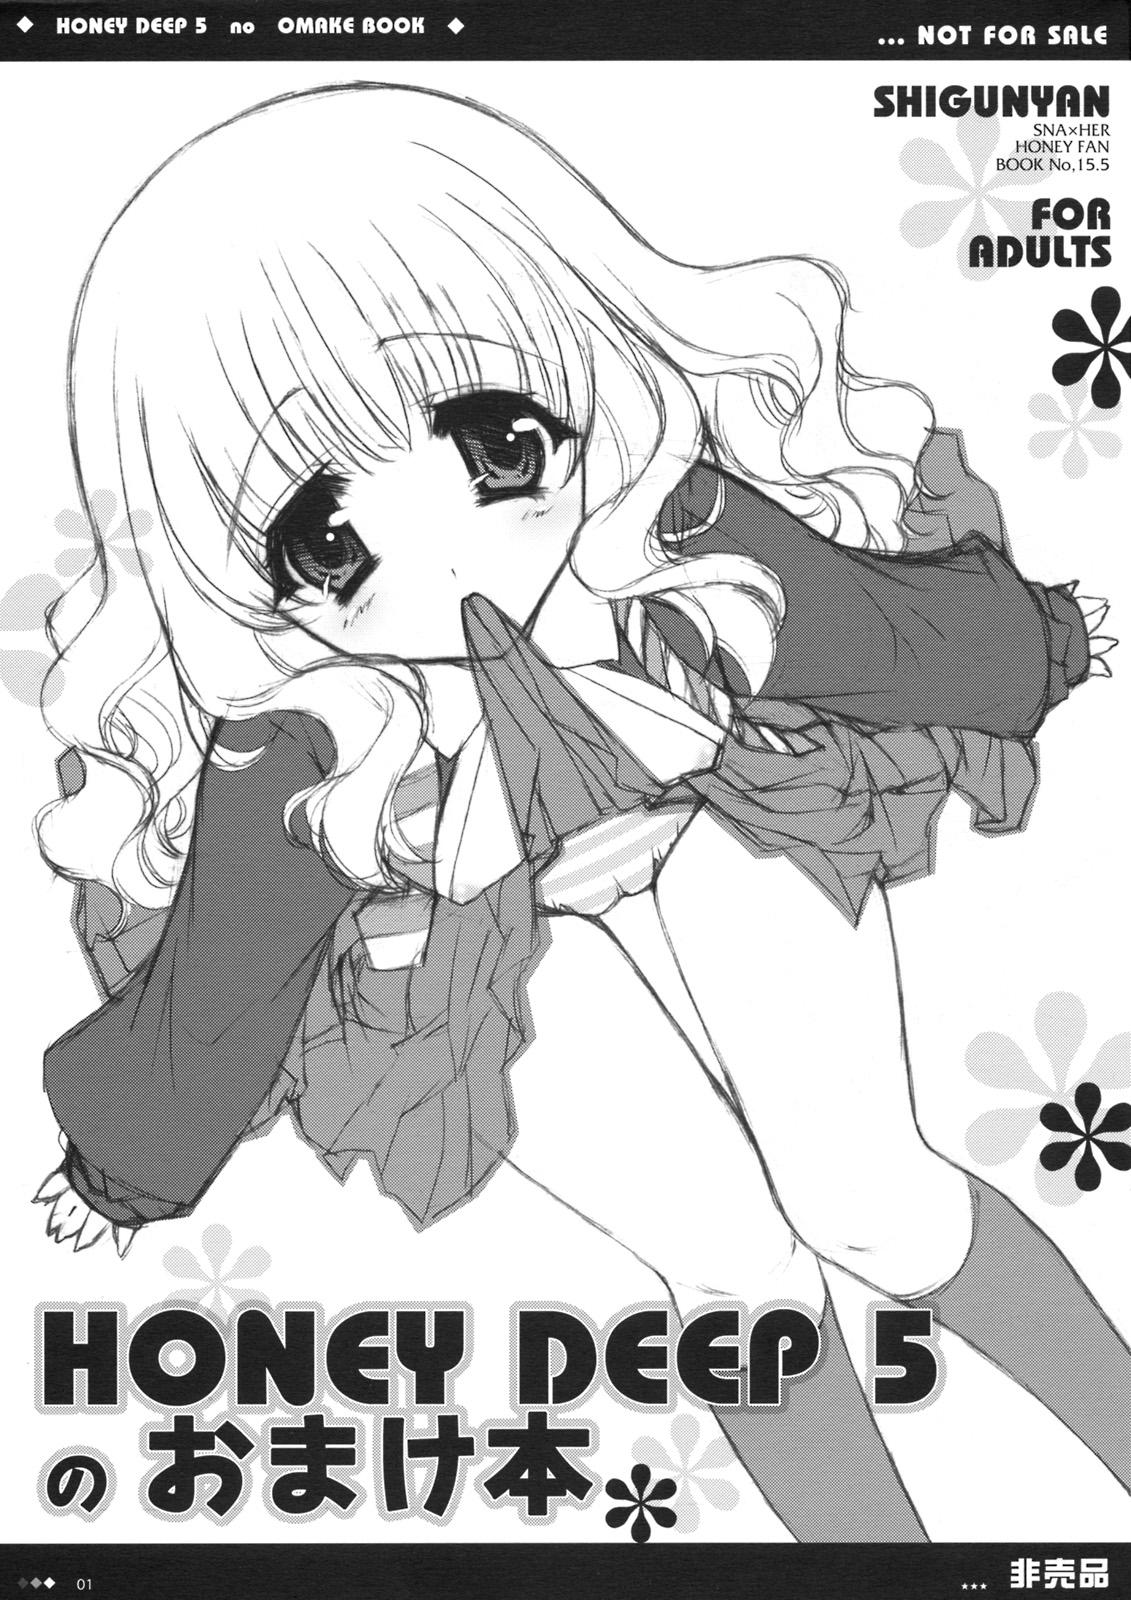 Jeans HONEY DEEP 5 no Omake Hon - Harry potter First - Picture 1